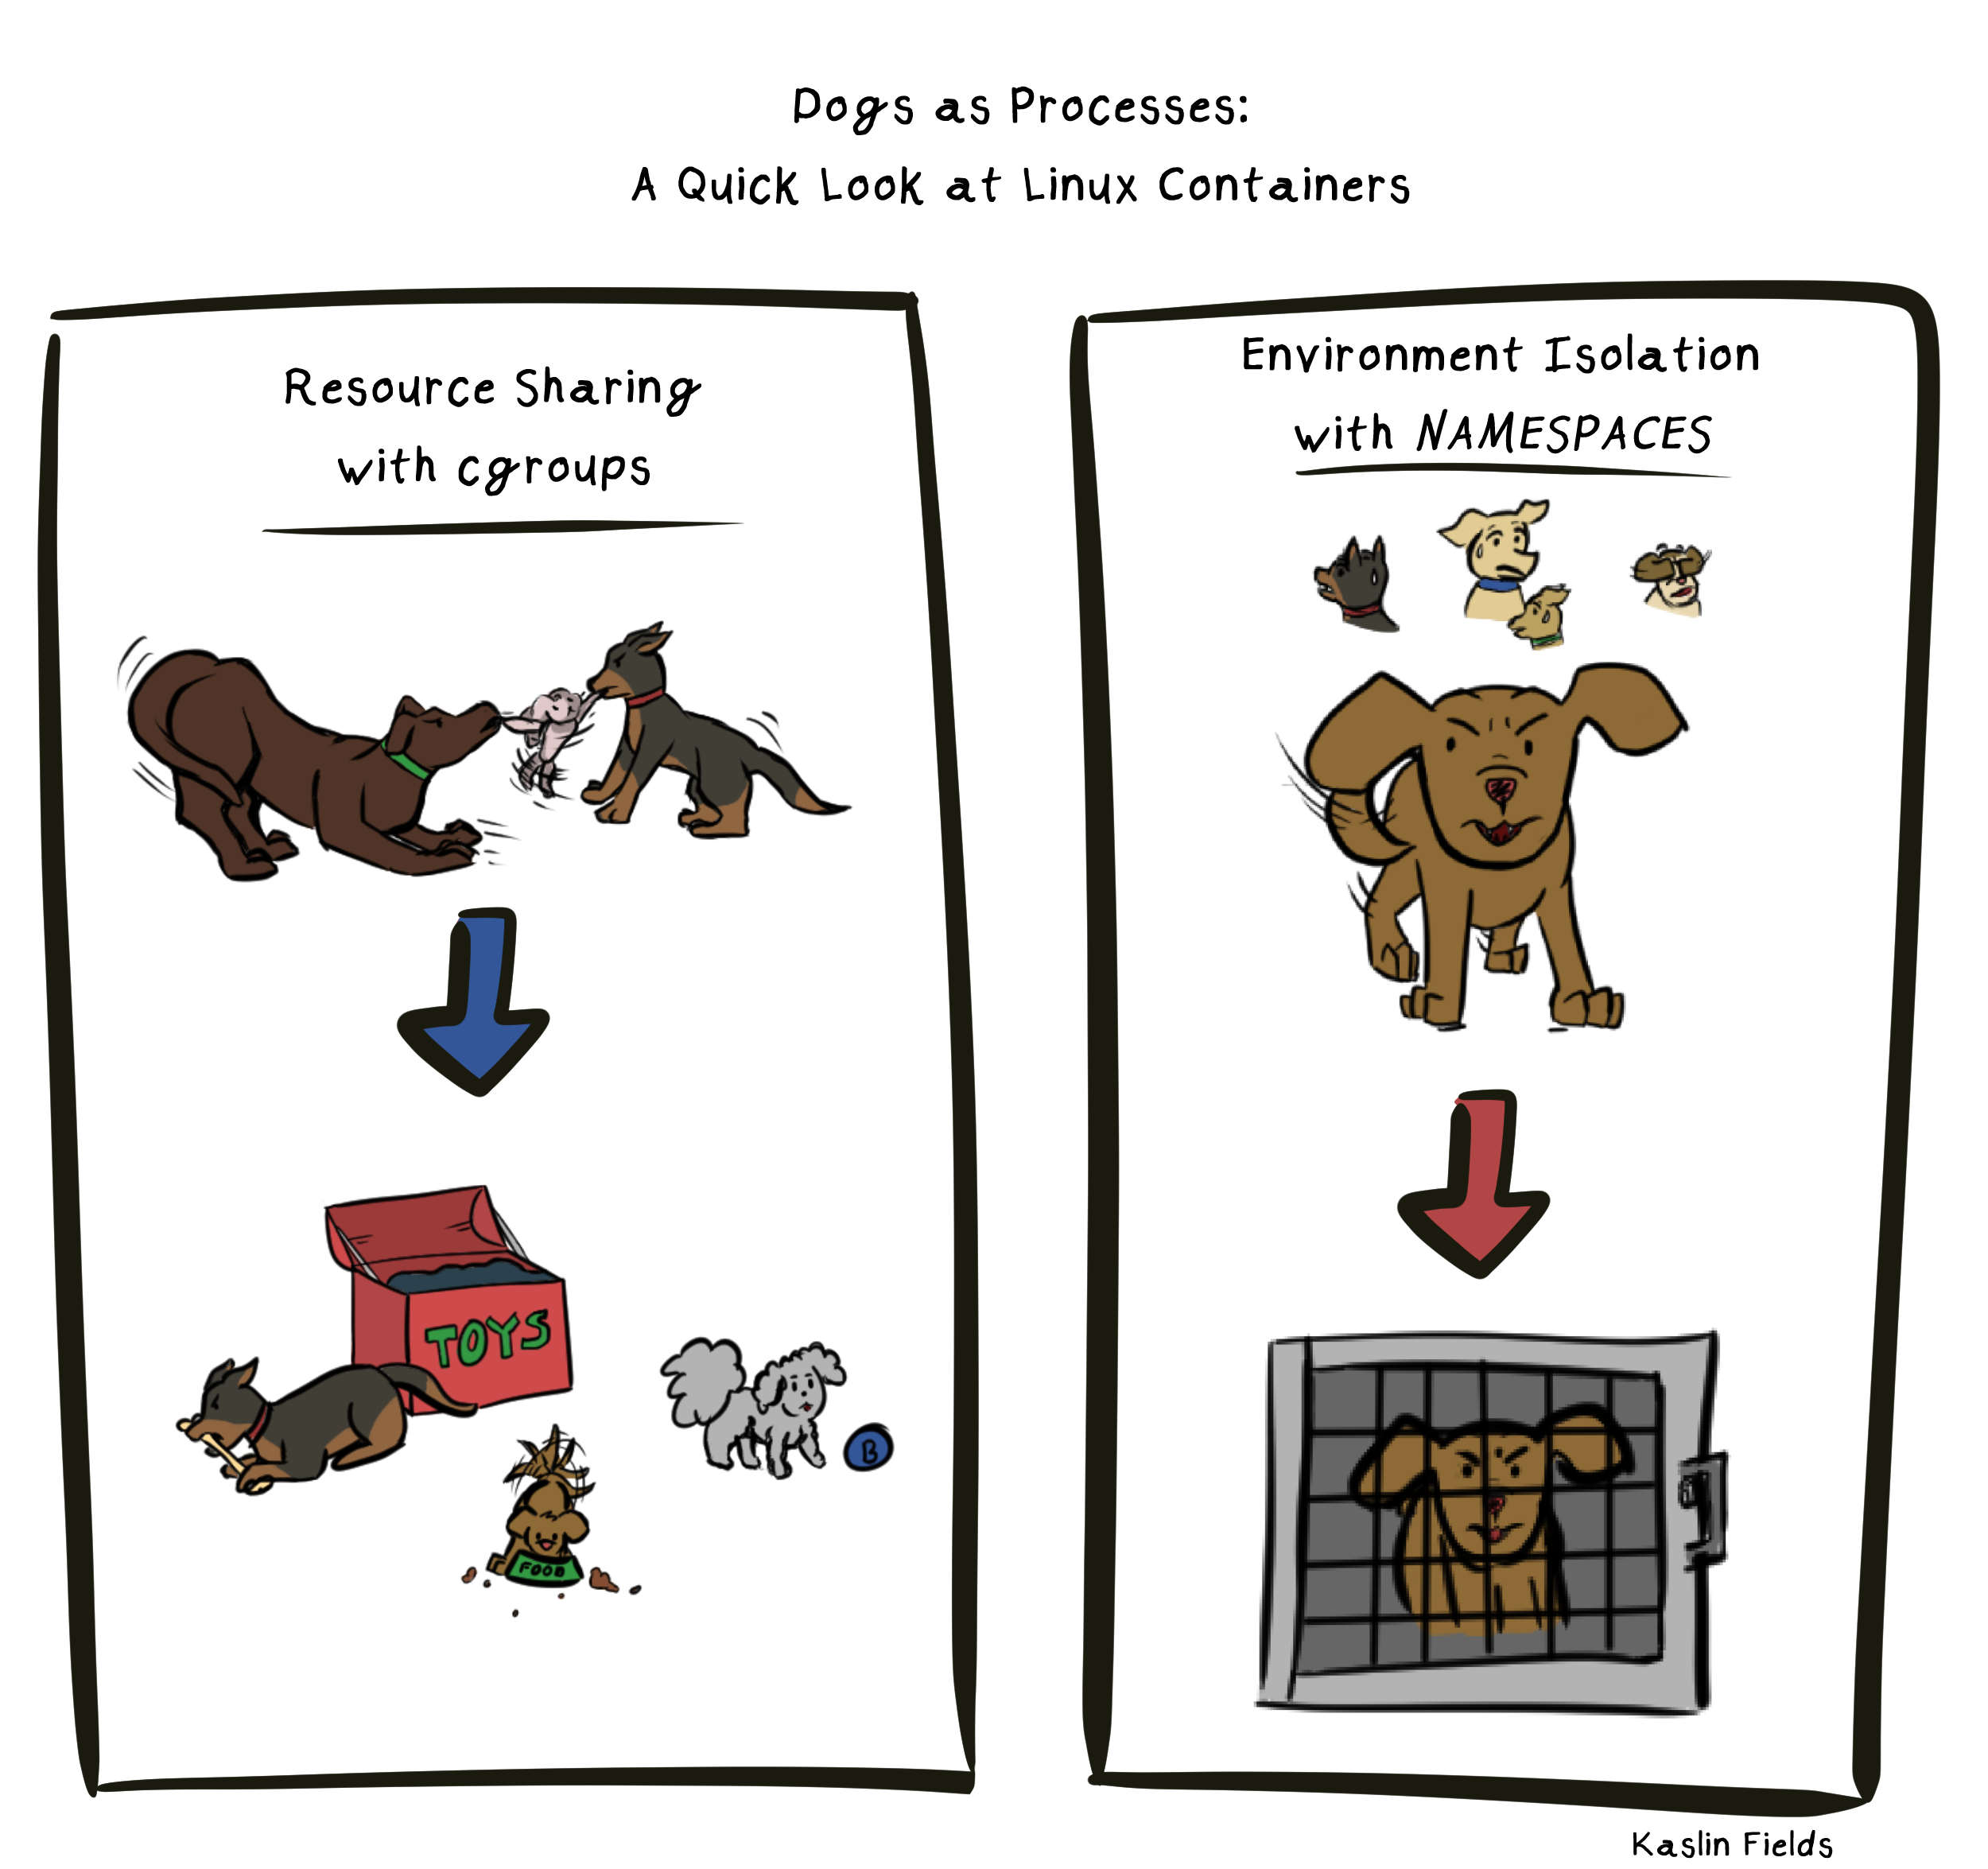 A visual analogy using dogs to explain Linux cgroups and namespaces.